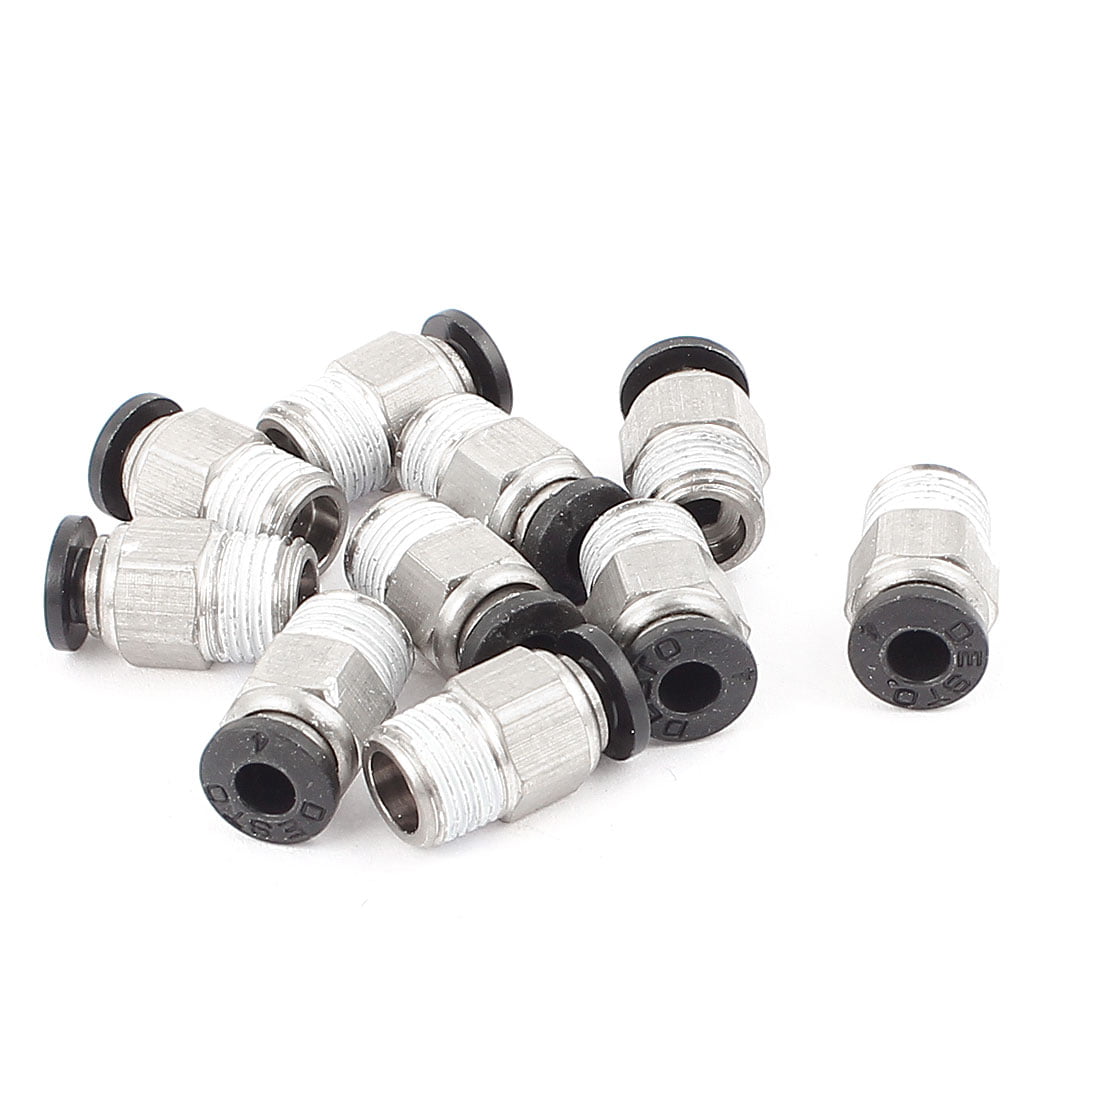 5 X Male Straight Connector Tube OD 1/8" X NPT 1/4 PU Air Push In Fitting 